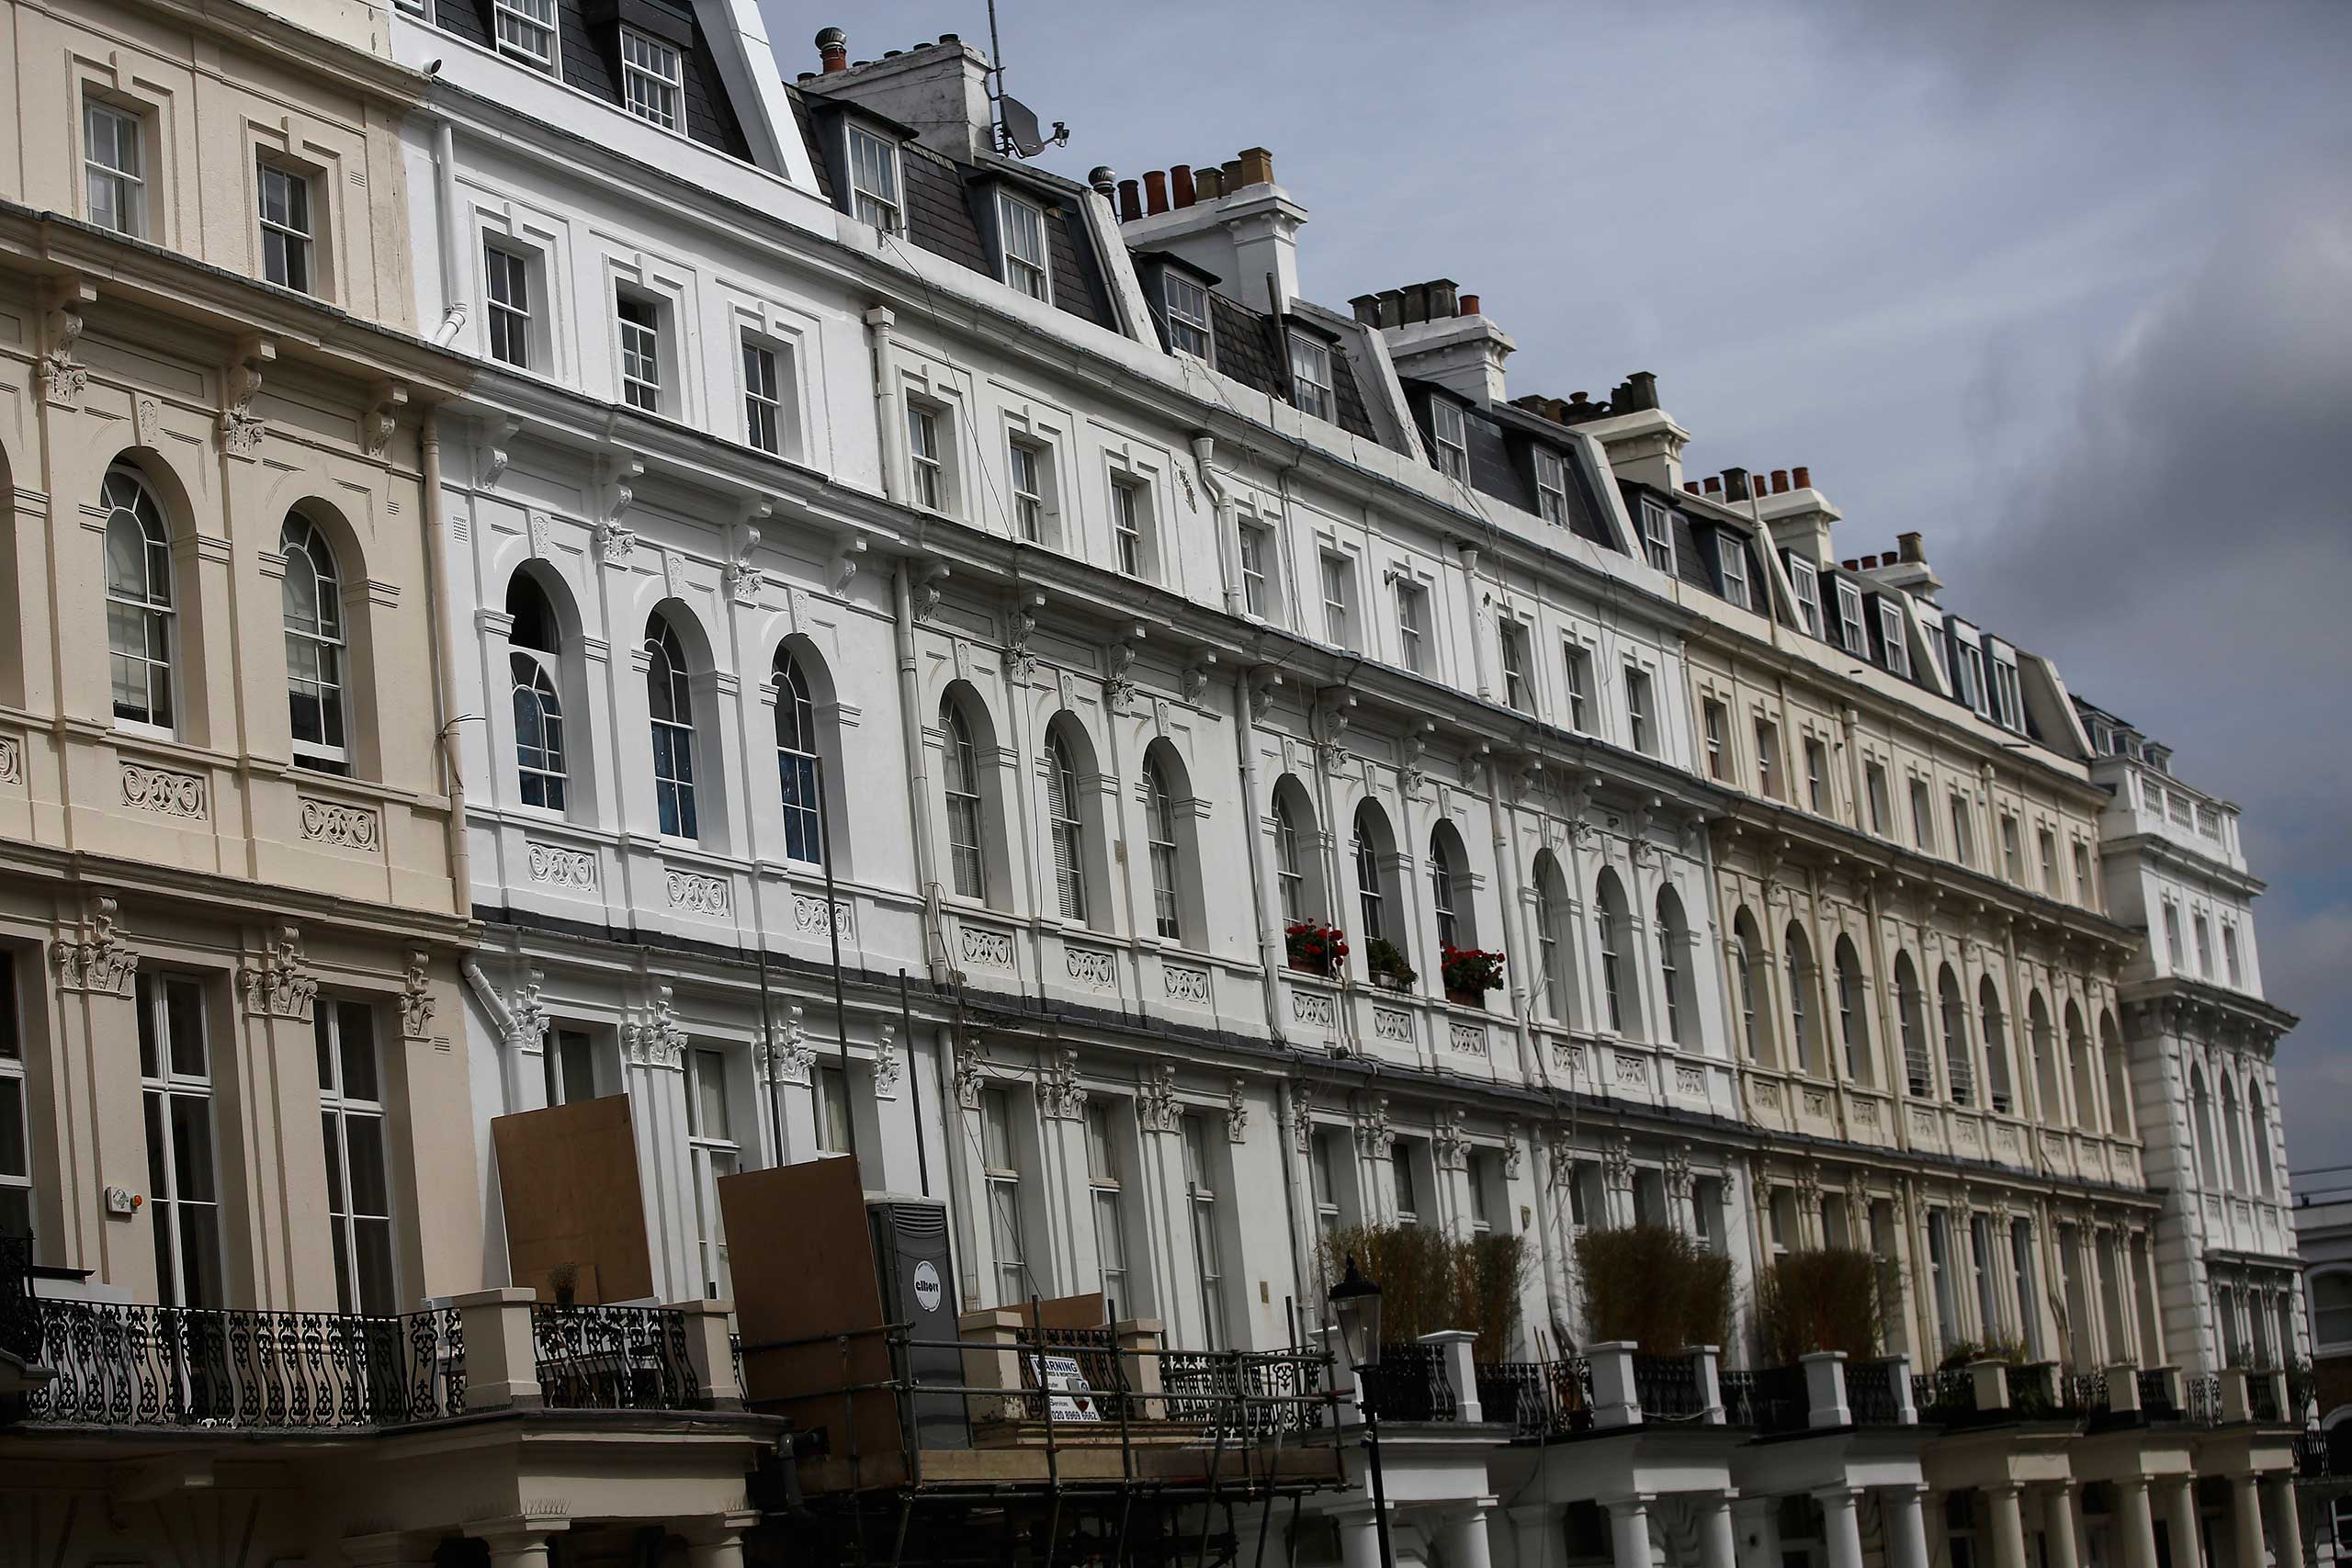 Rows of luxury residential properties stand in the Kensington and Chelsea districts of London, Aug. 10, 2015. (Simon Dawson—Bloomberg/Getty Images)